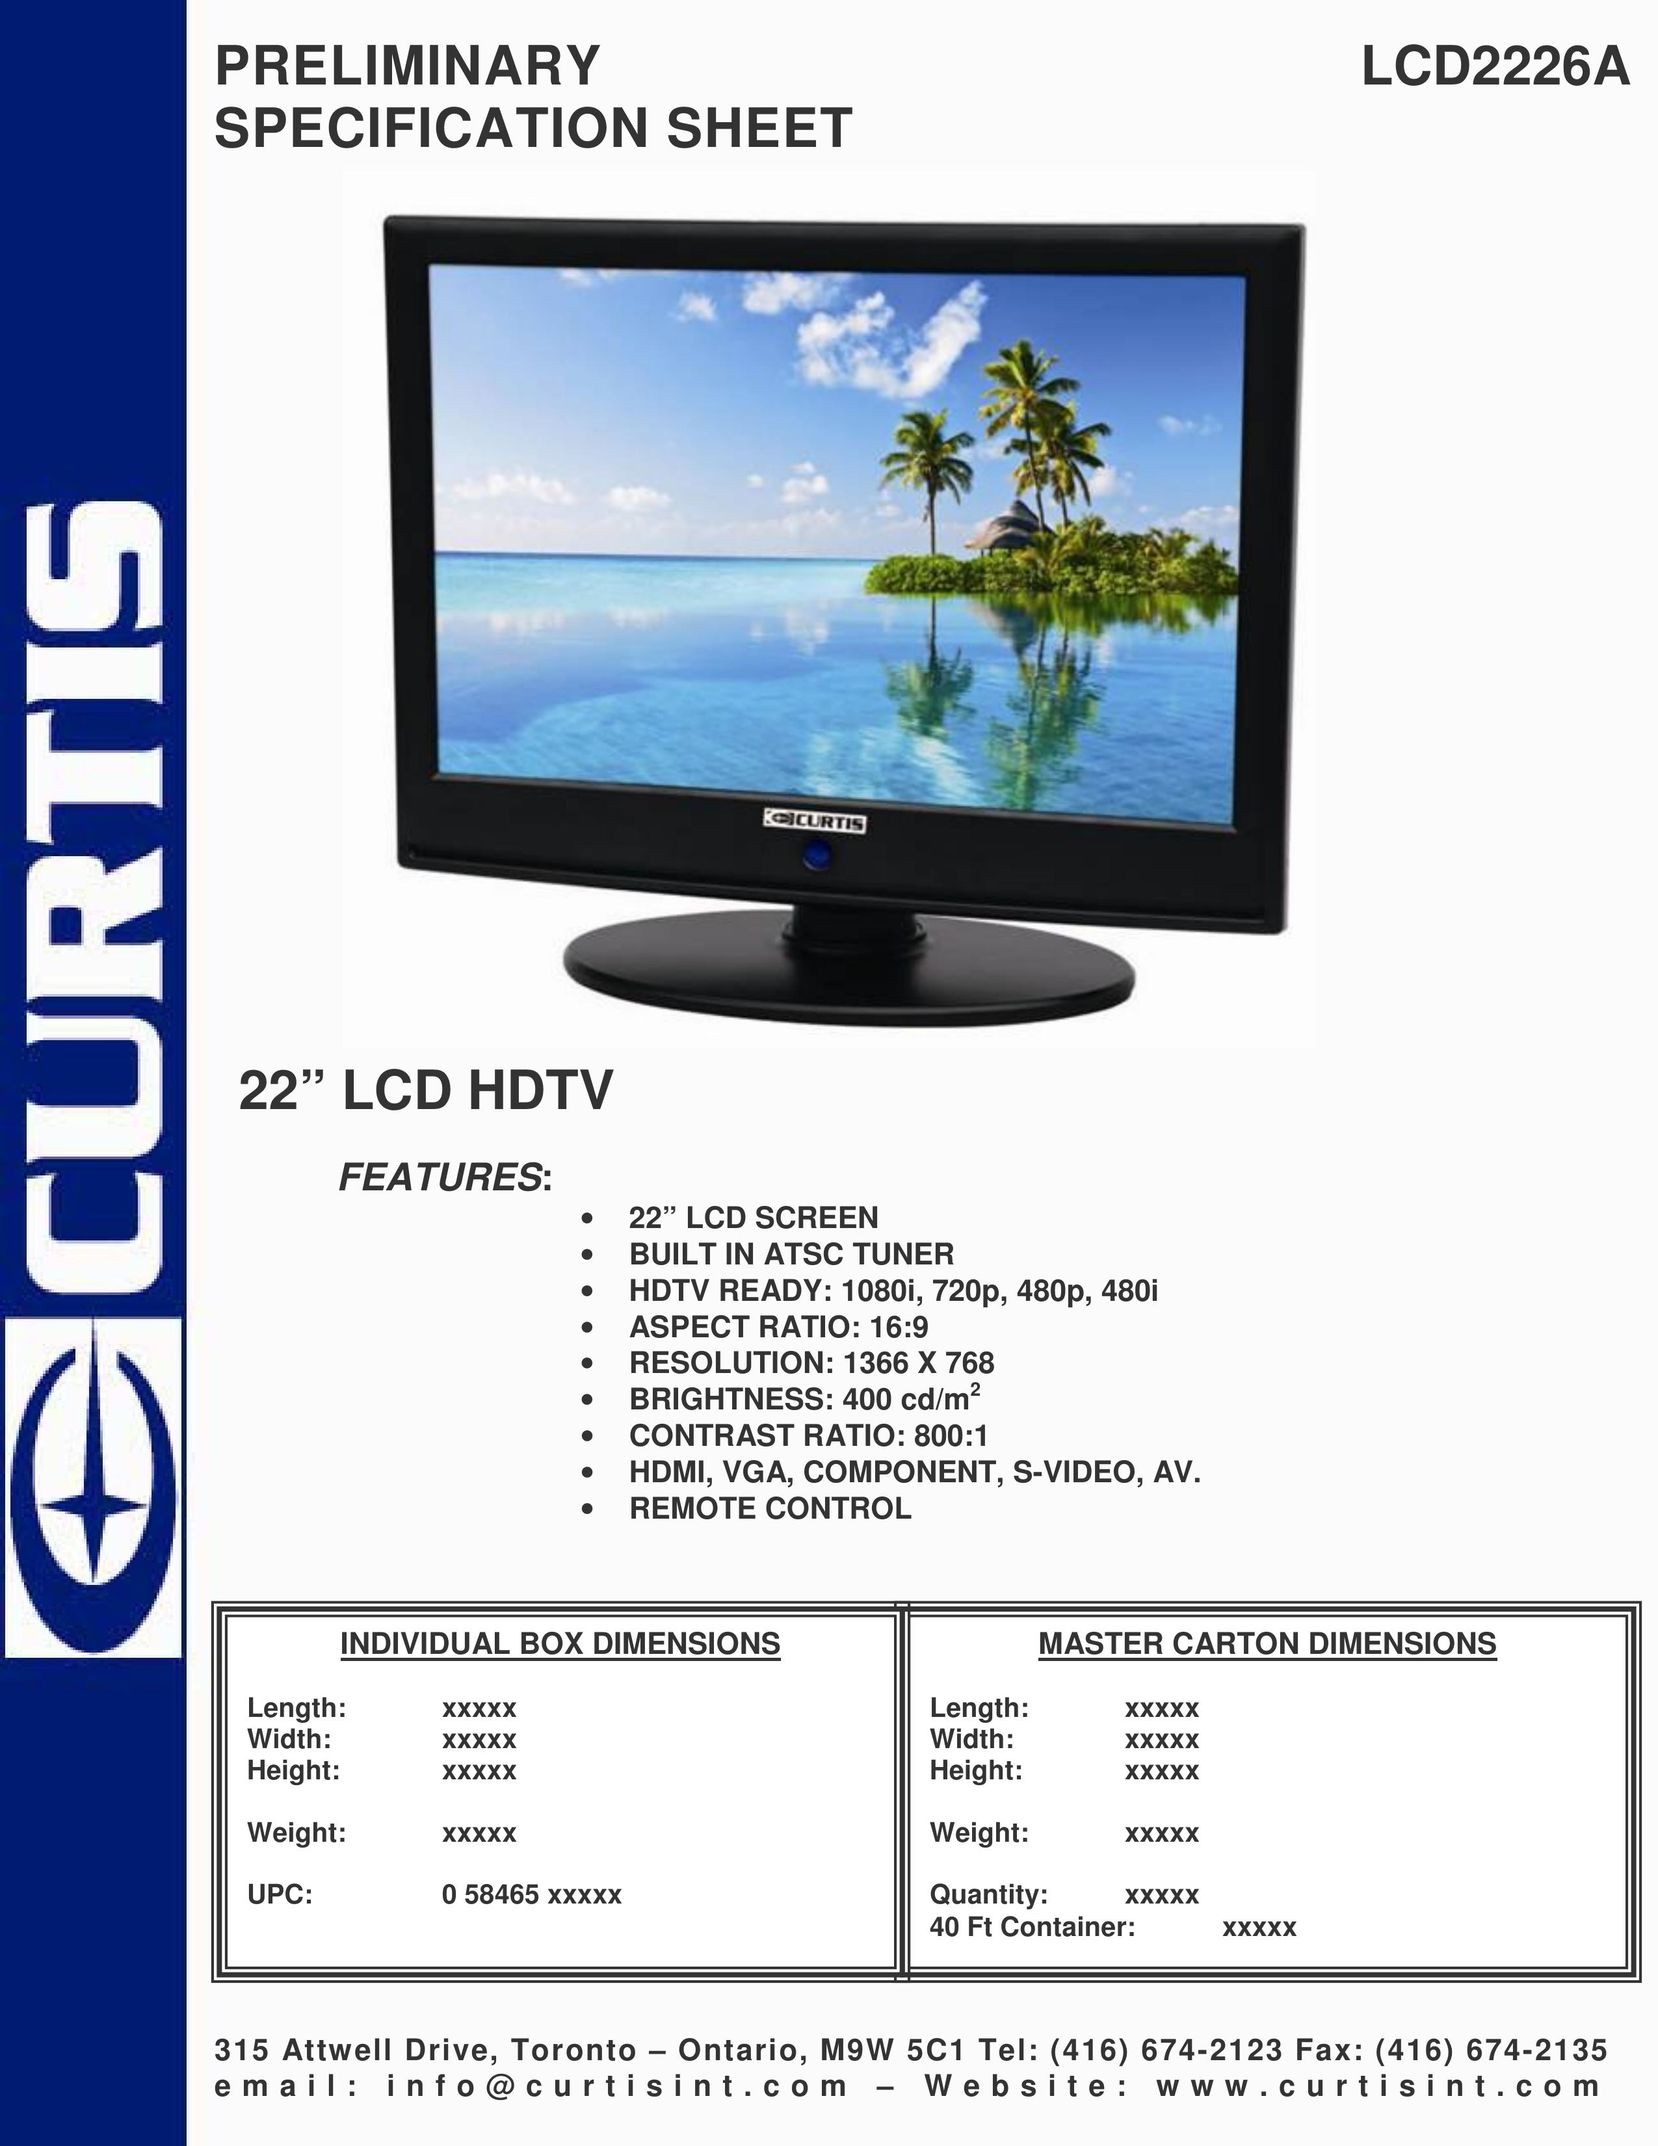 Curtis LCD2226A Flat Panel Television User Manual